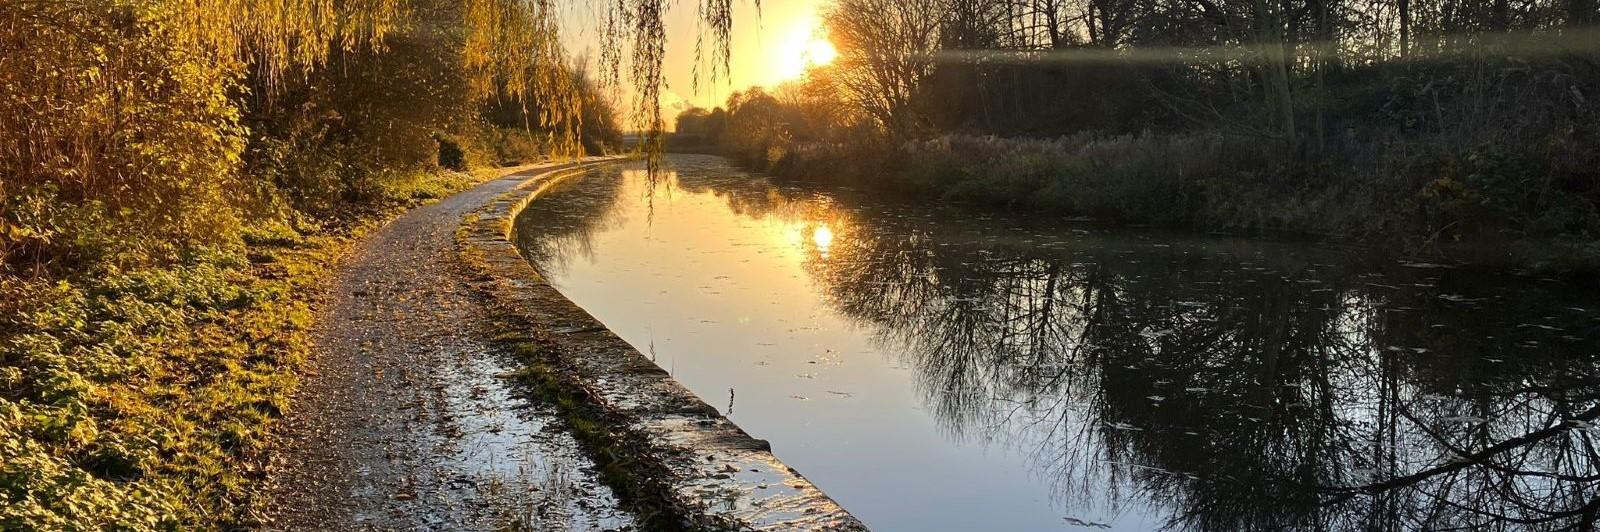 low bright sun reflecting trees in a canal bordered by wide muddy towpath and stone edge shining in the sun. Credit Helen Clayton